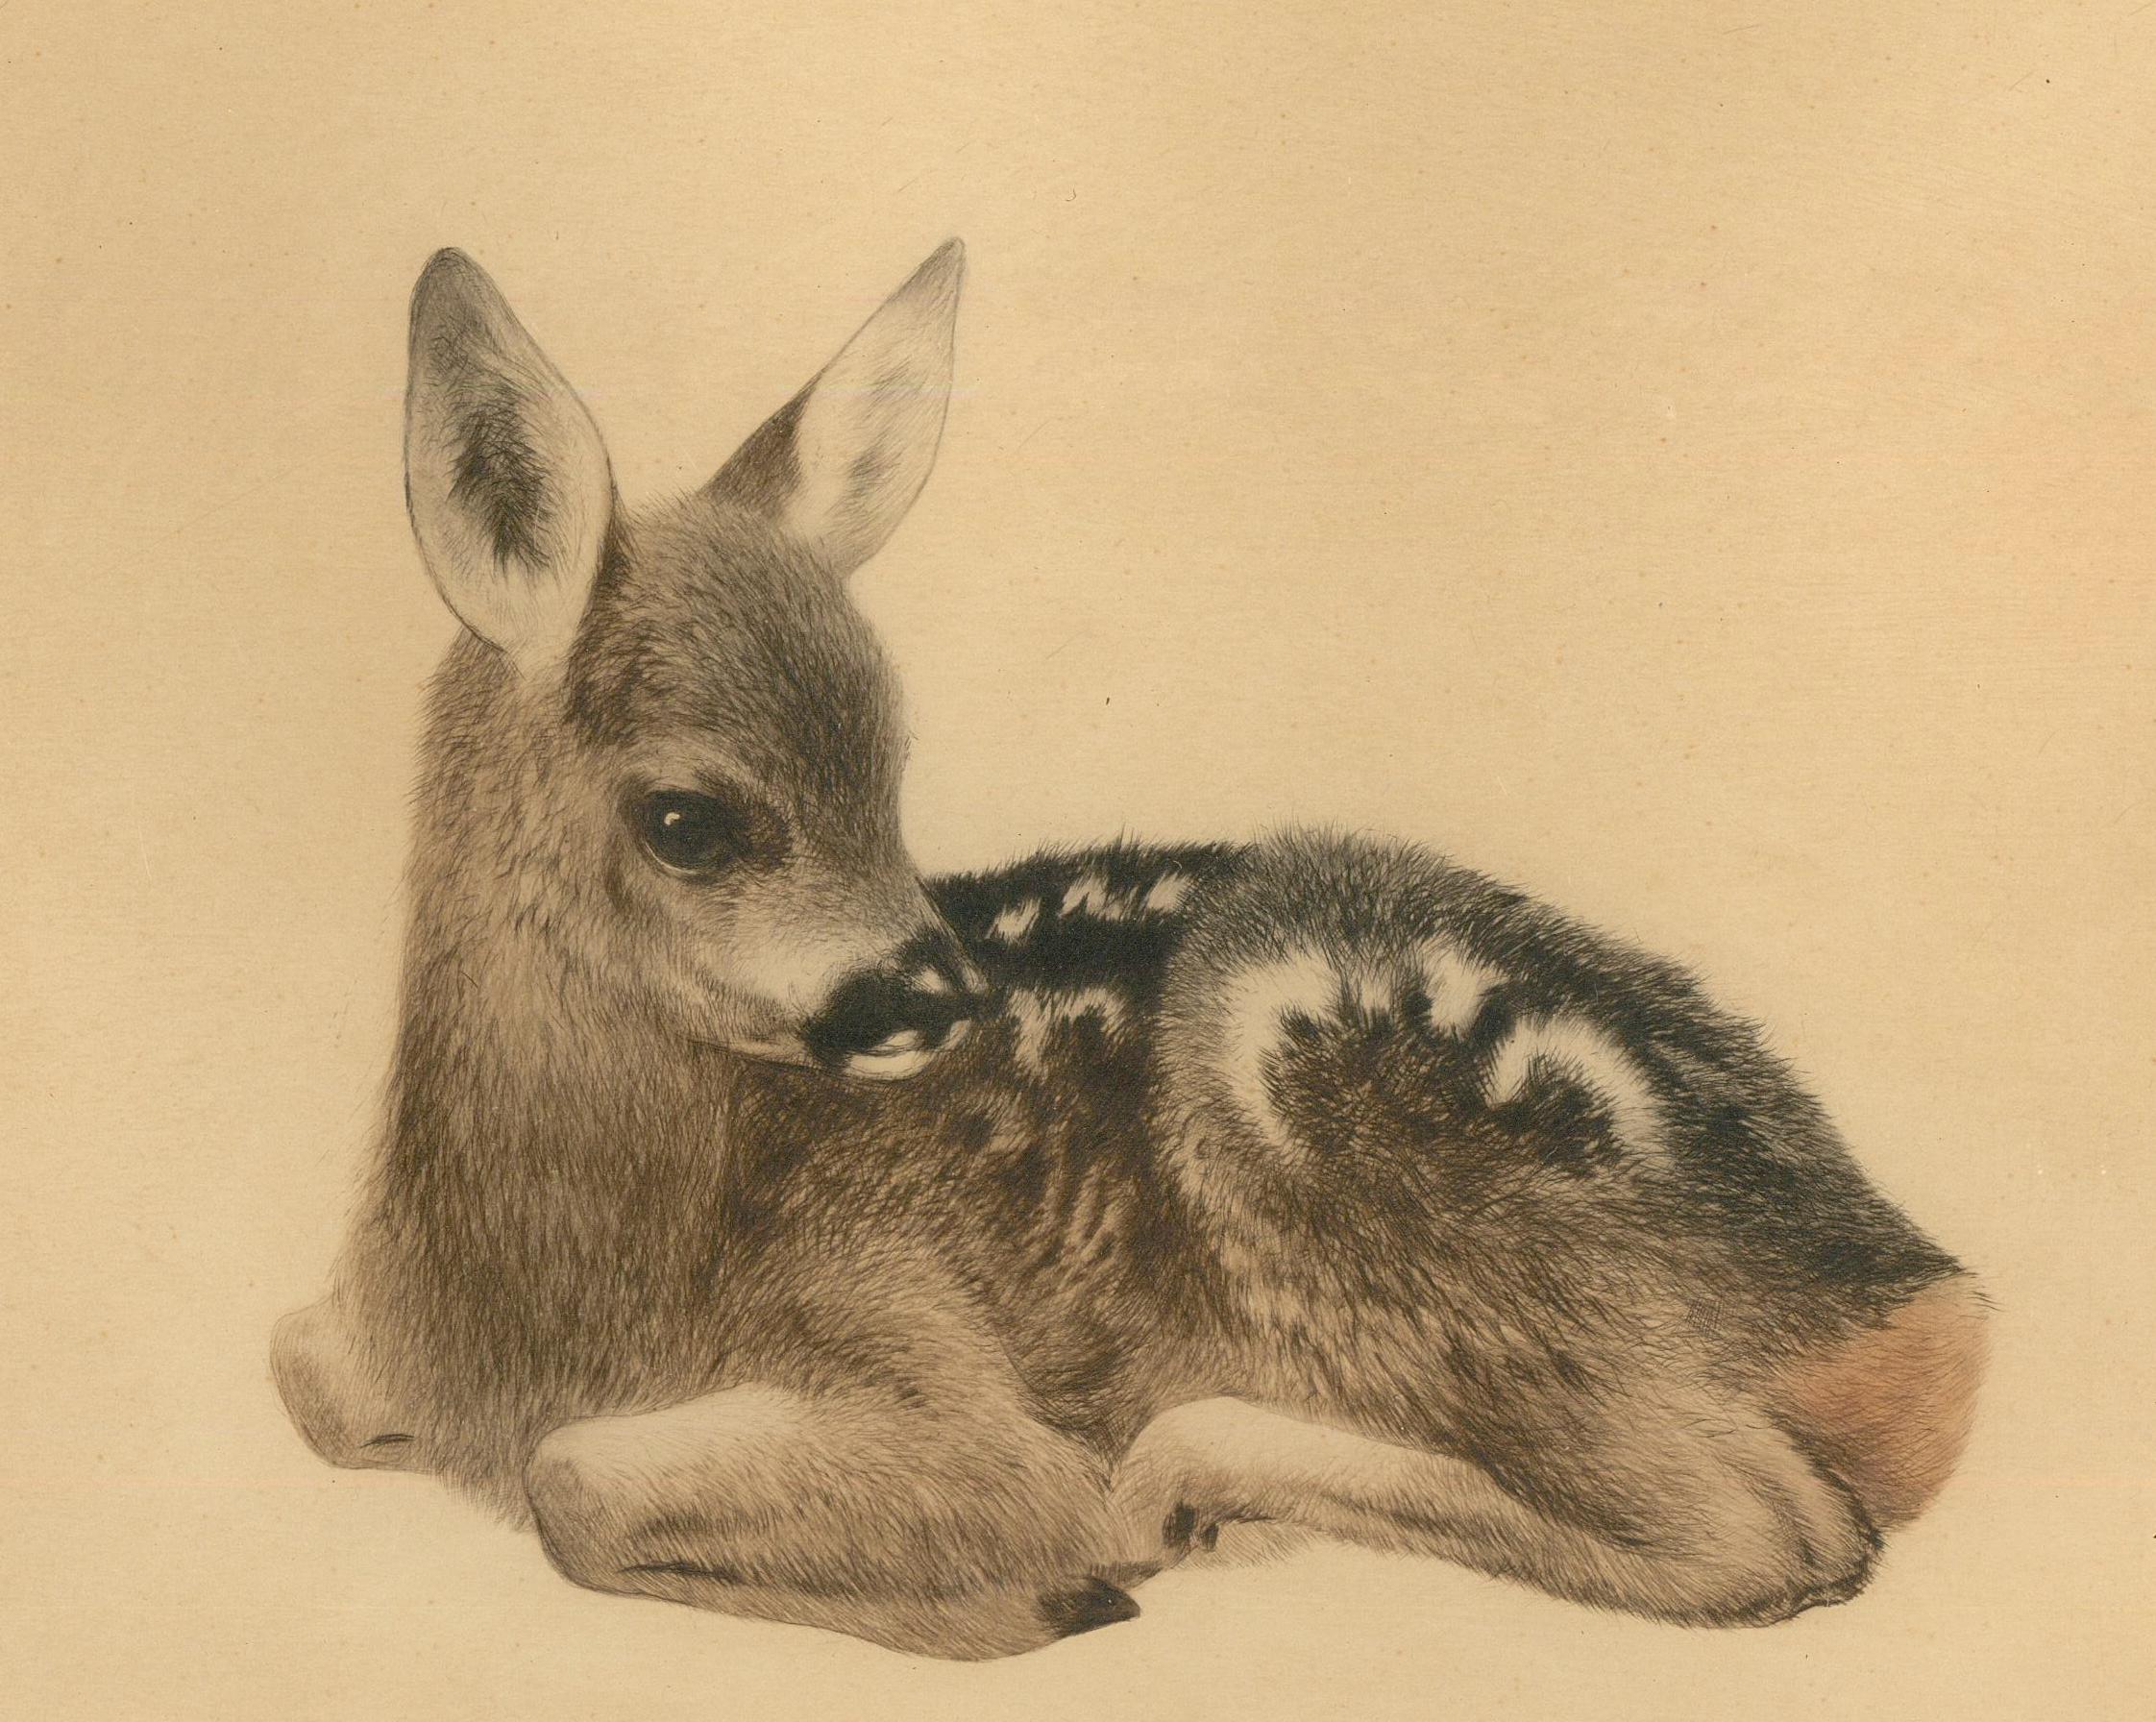 A very fine etching by the well-known Germany artist Kurt Meyer-Eberhardt. Colour has been added direct to the artist's plate in sepia tones to create this hype-realistic study of a wild fawn at rest. The print has been monogrammed by the publisher